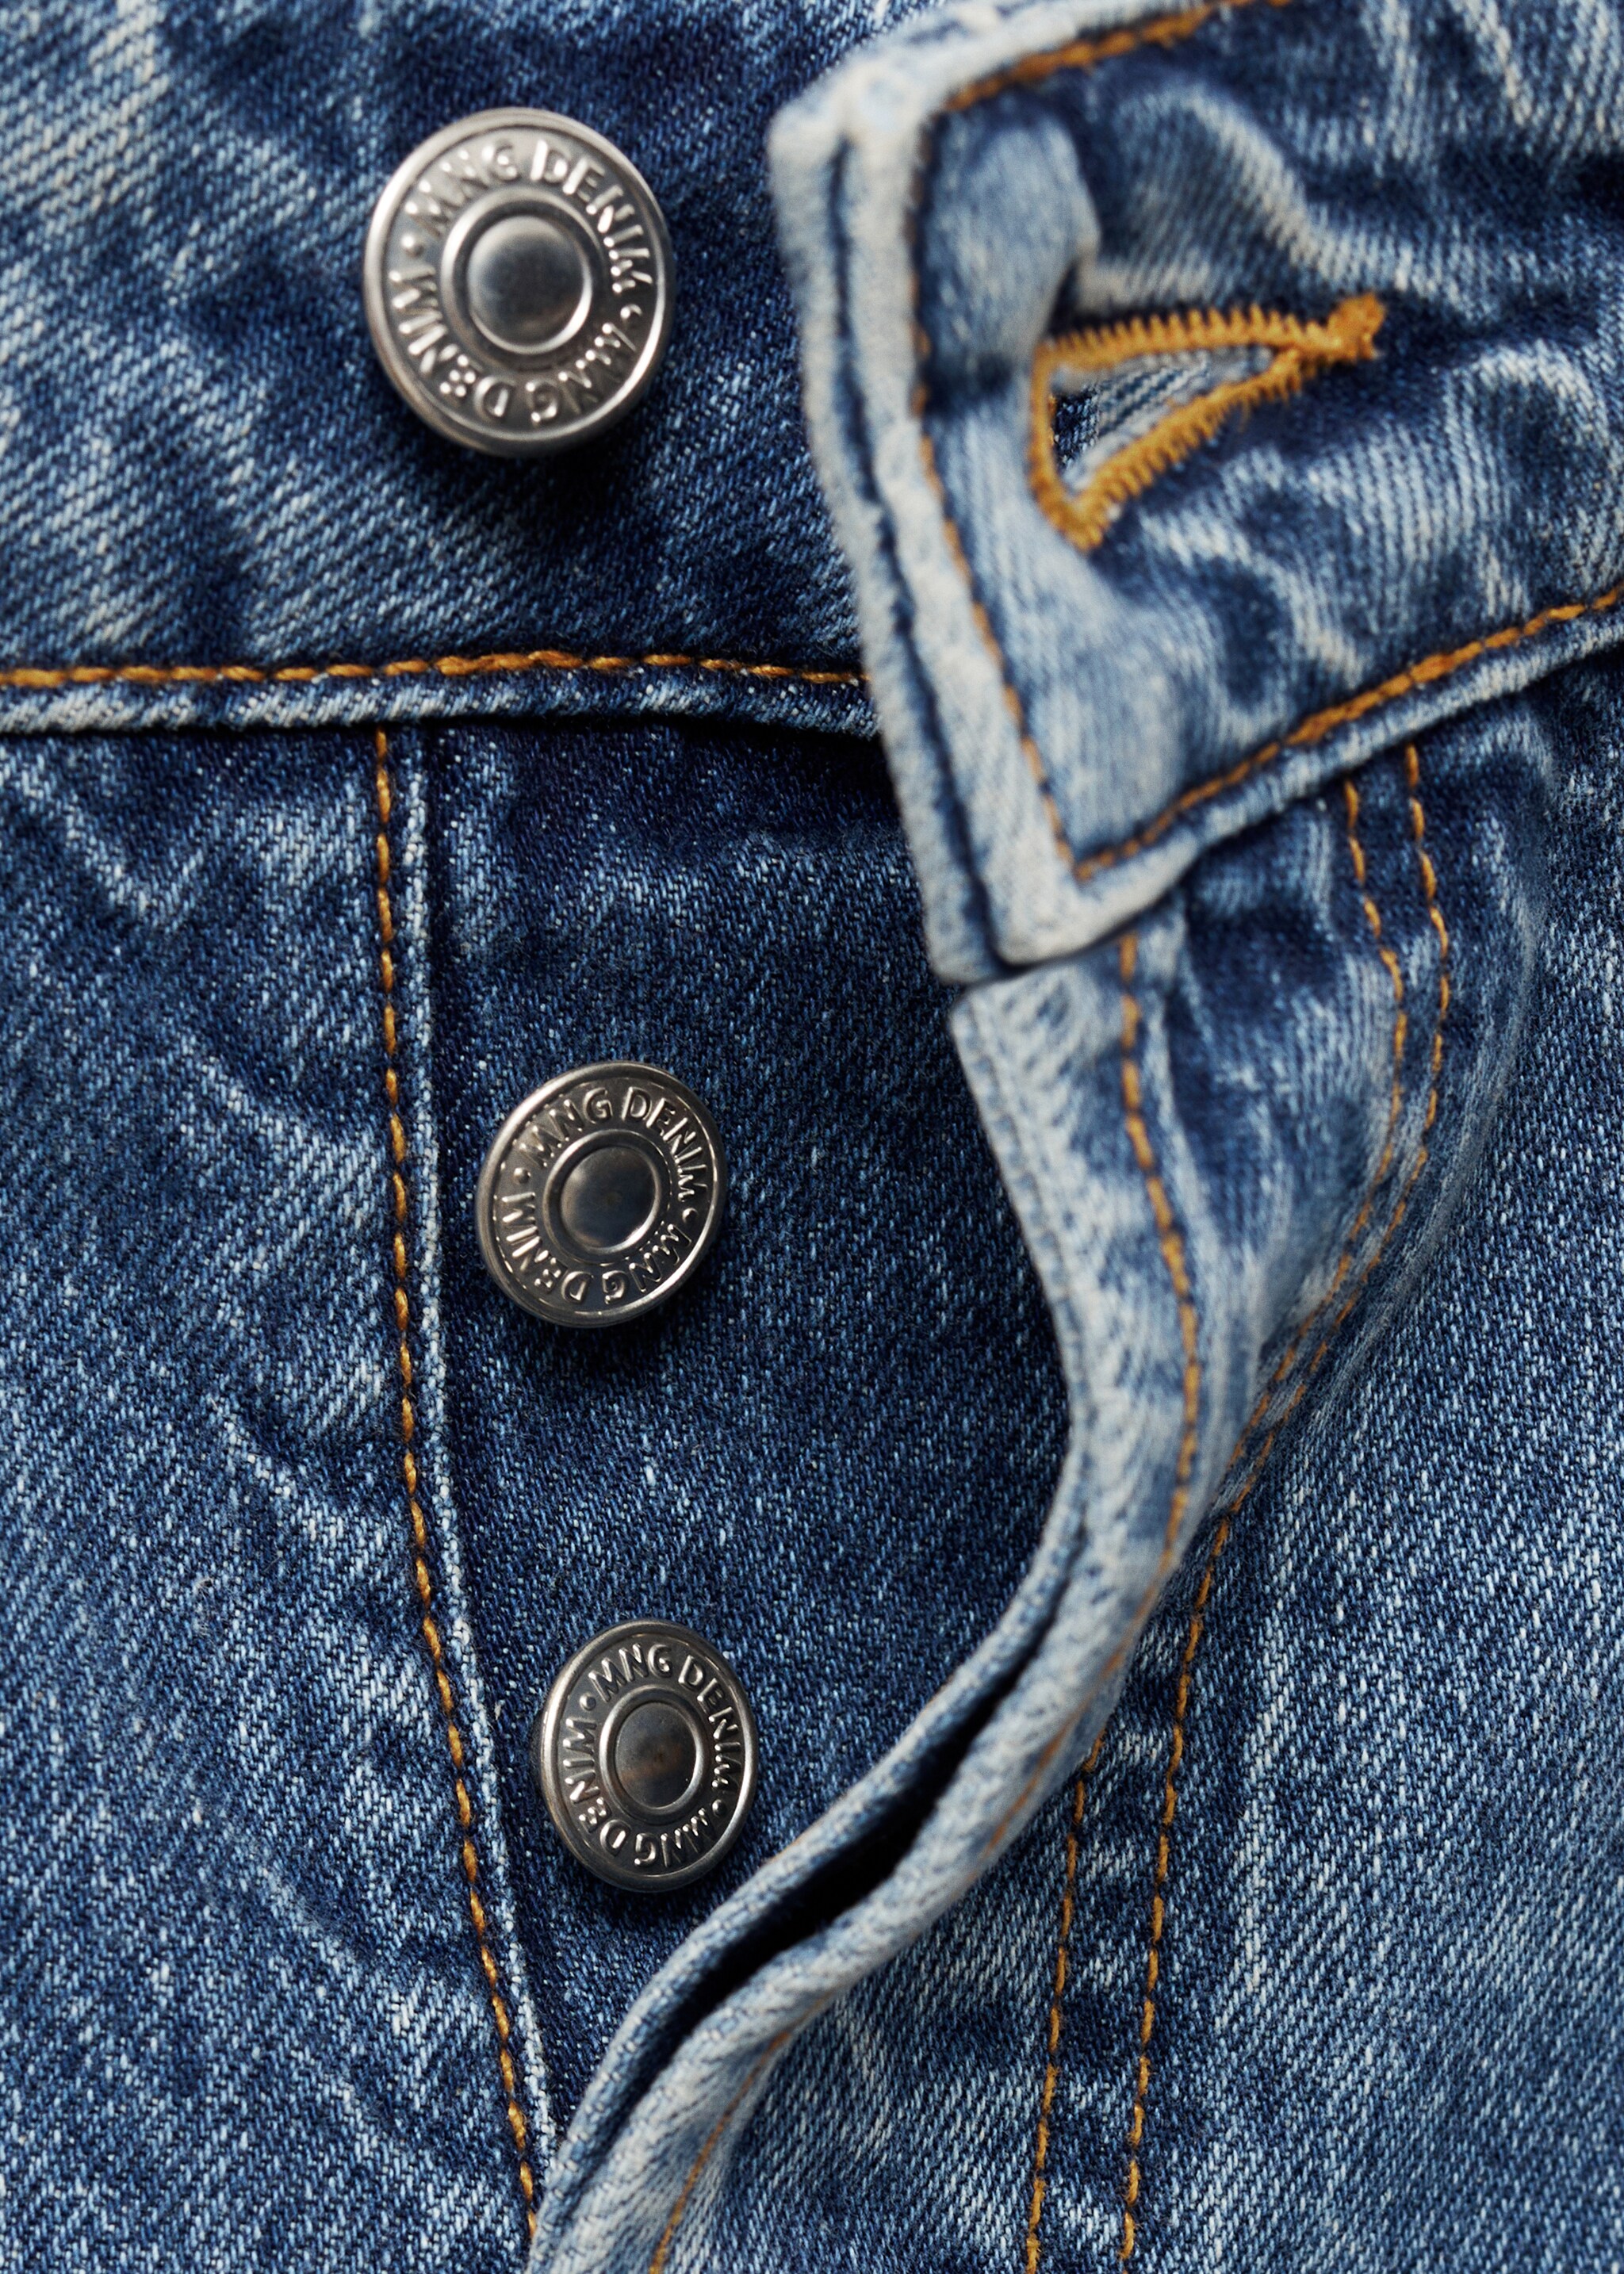 Medium-rise straight jeans with slits - Details of the article 0